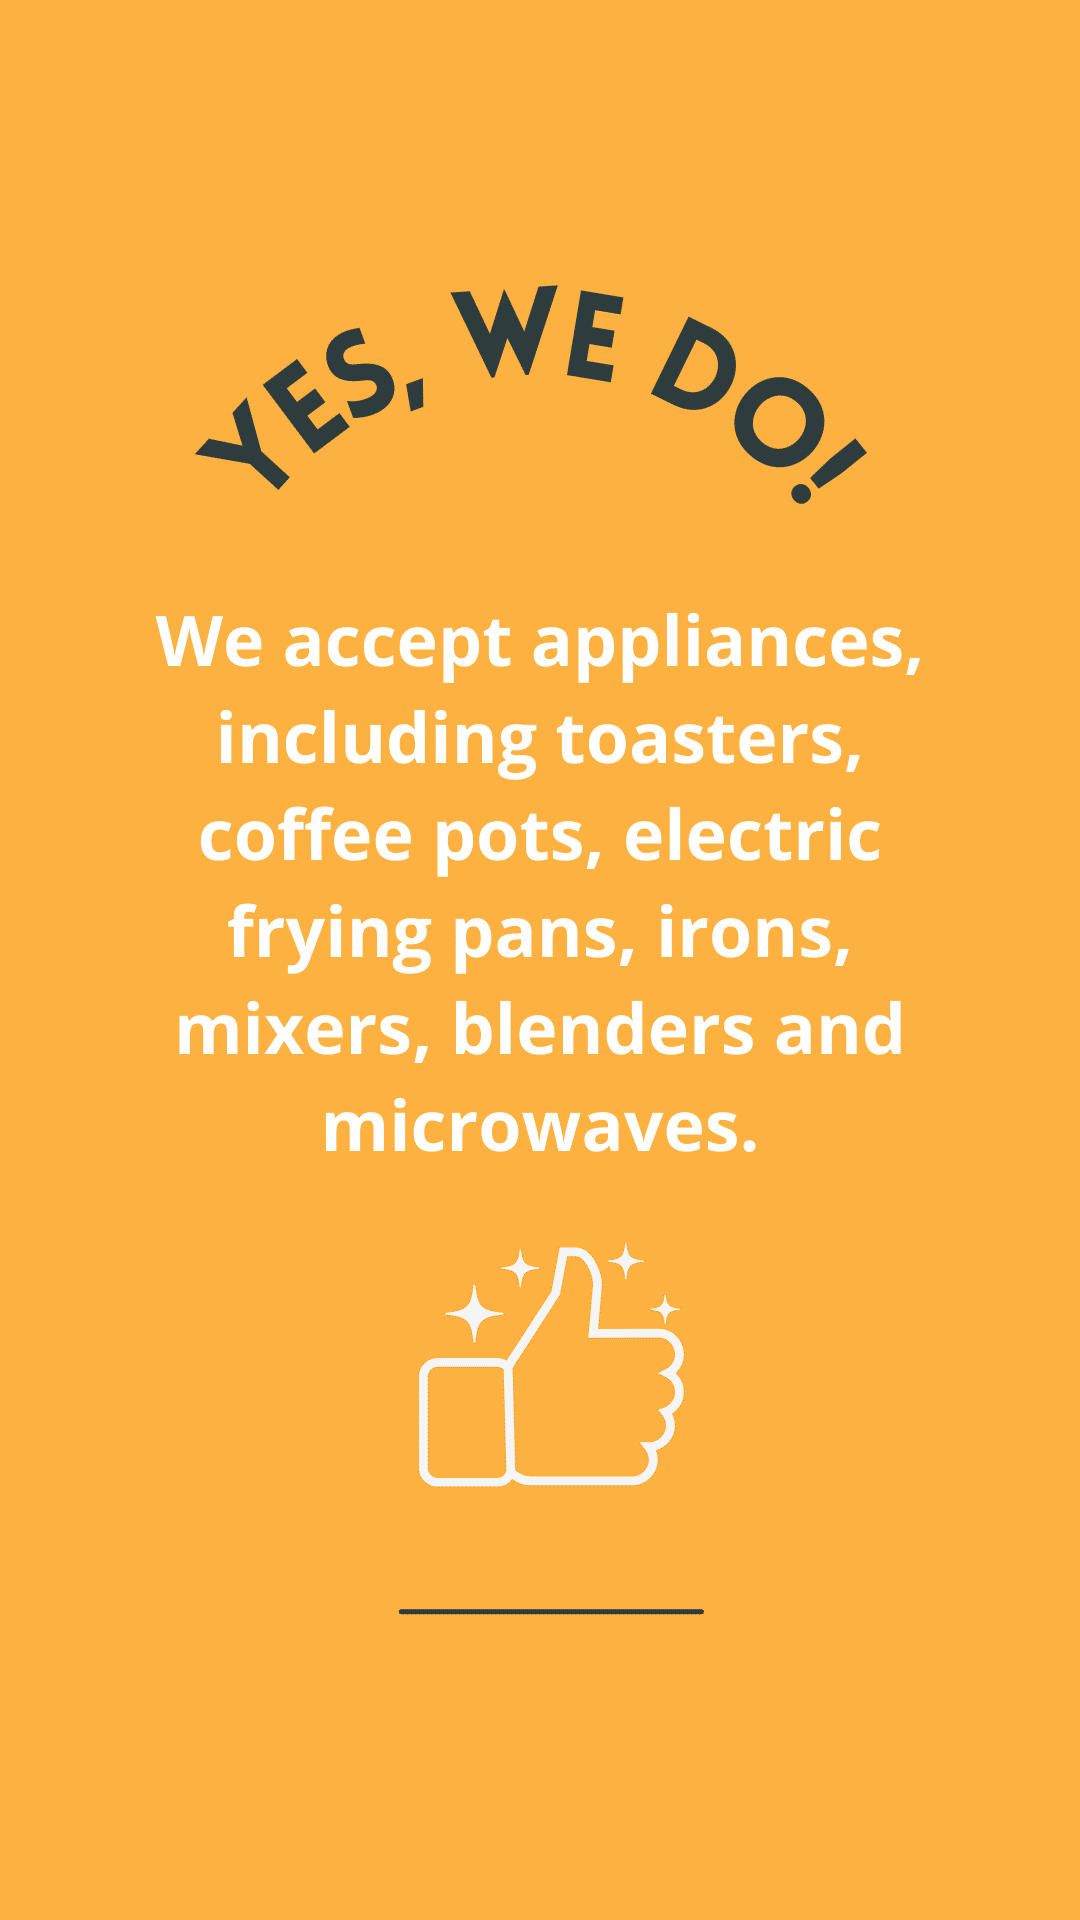 goodwill poster on donating small appliances